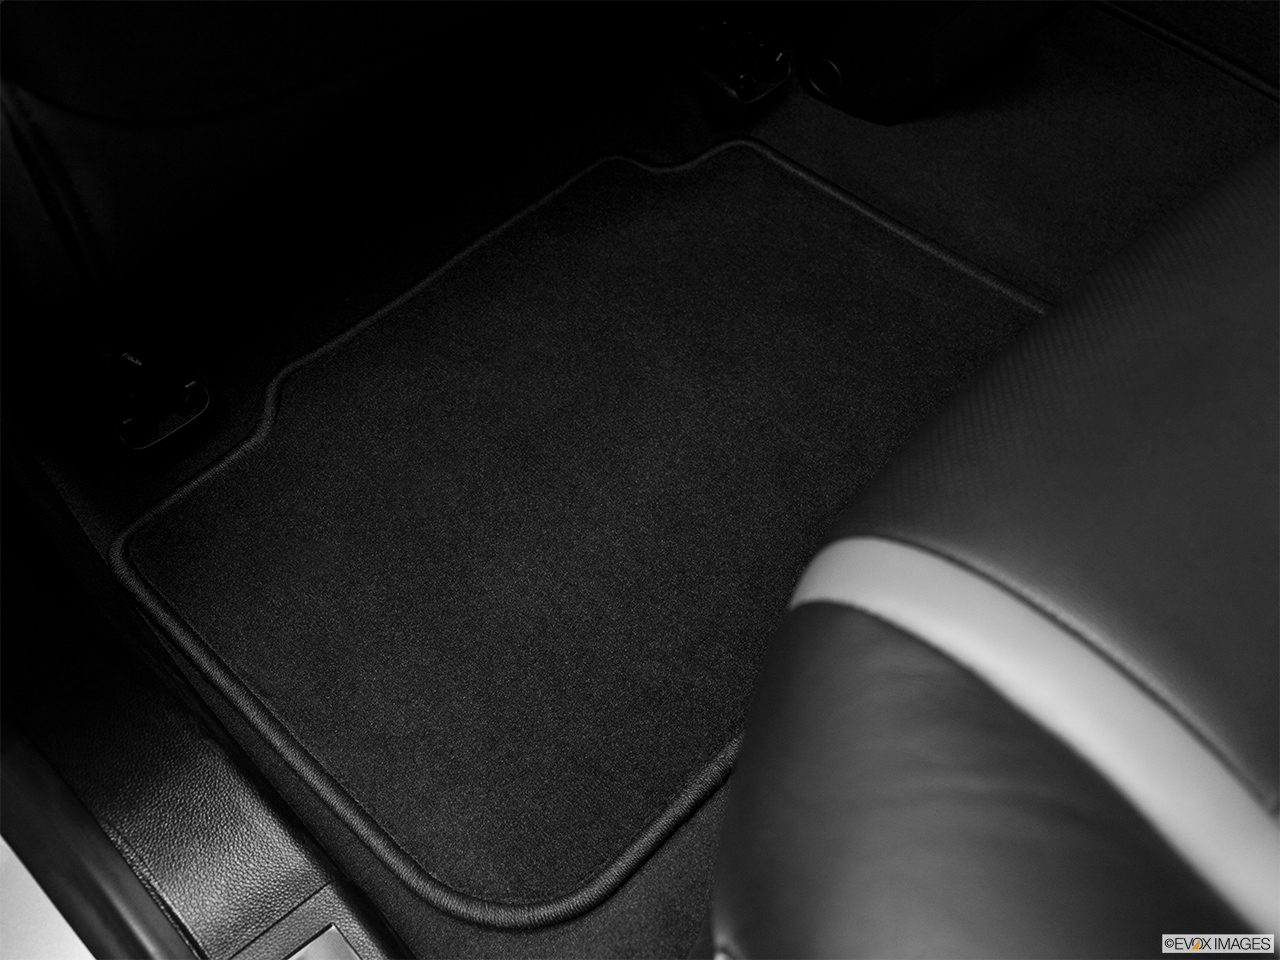 2011 Saab 9-4X 3.0i Rear driver's side floor mat. Mid-seat level from outside looking in. 